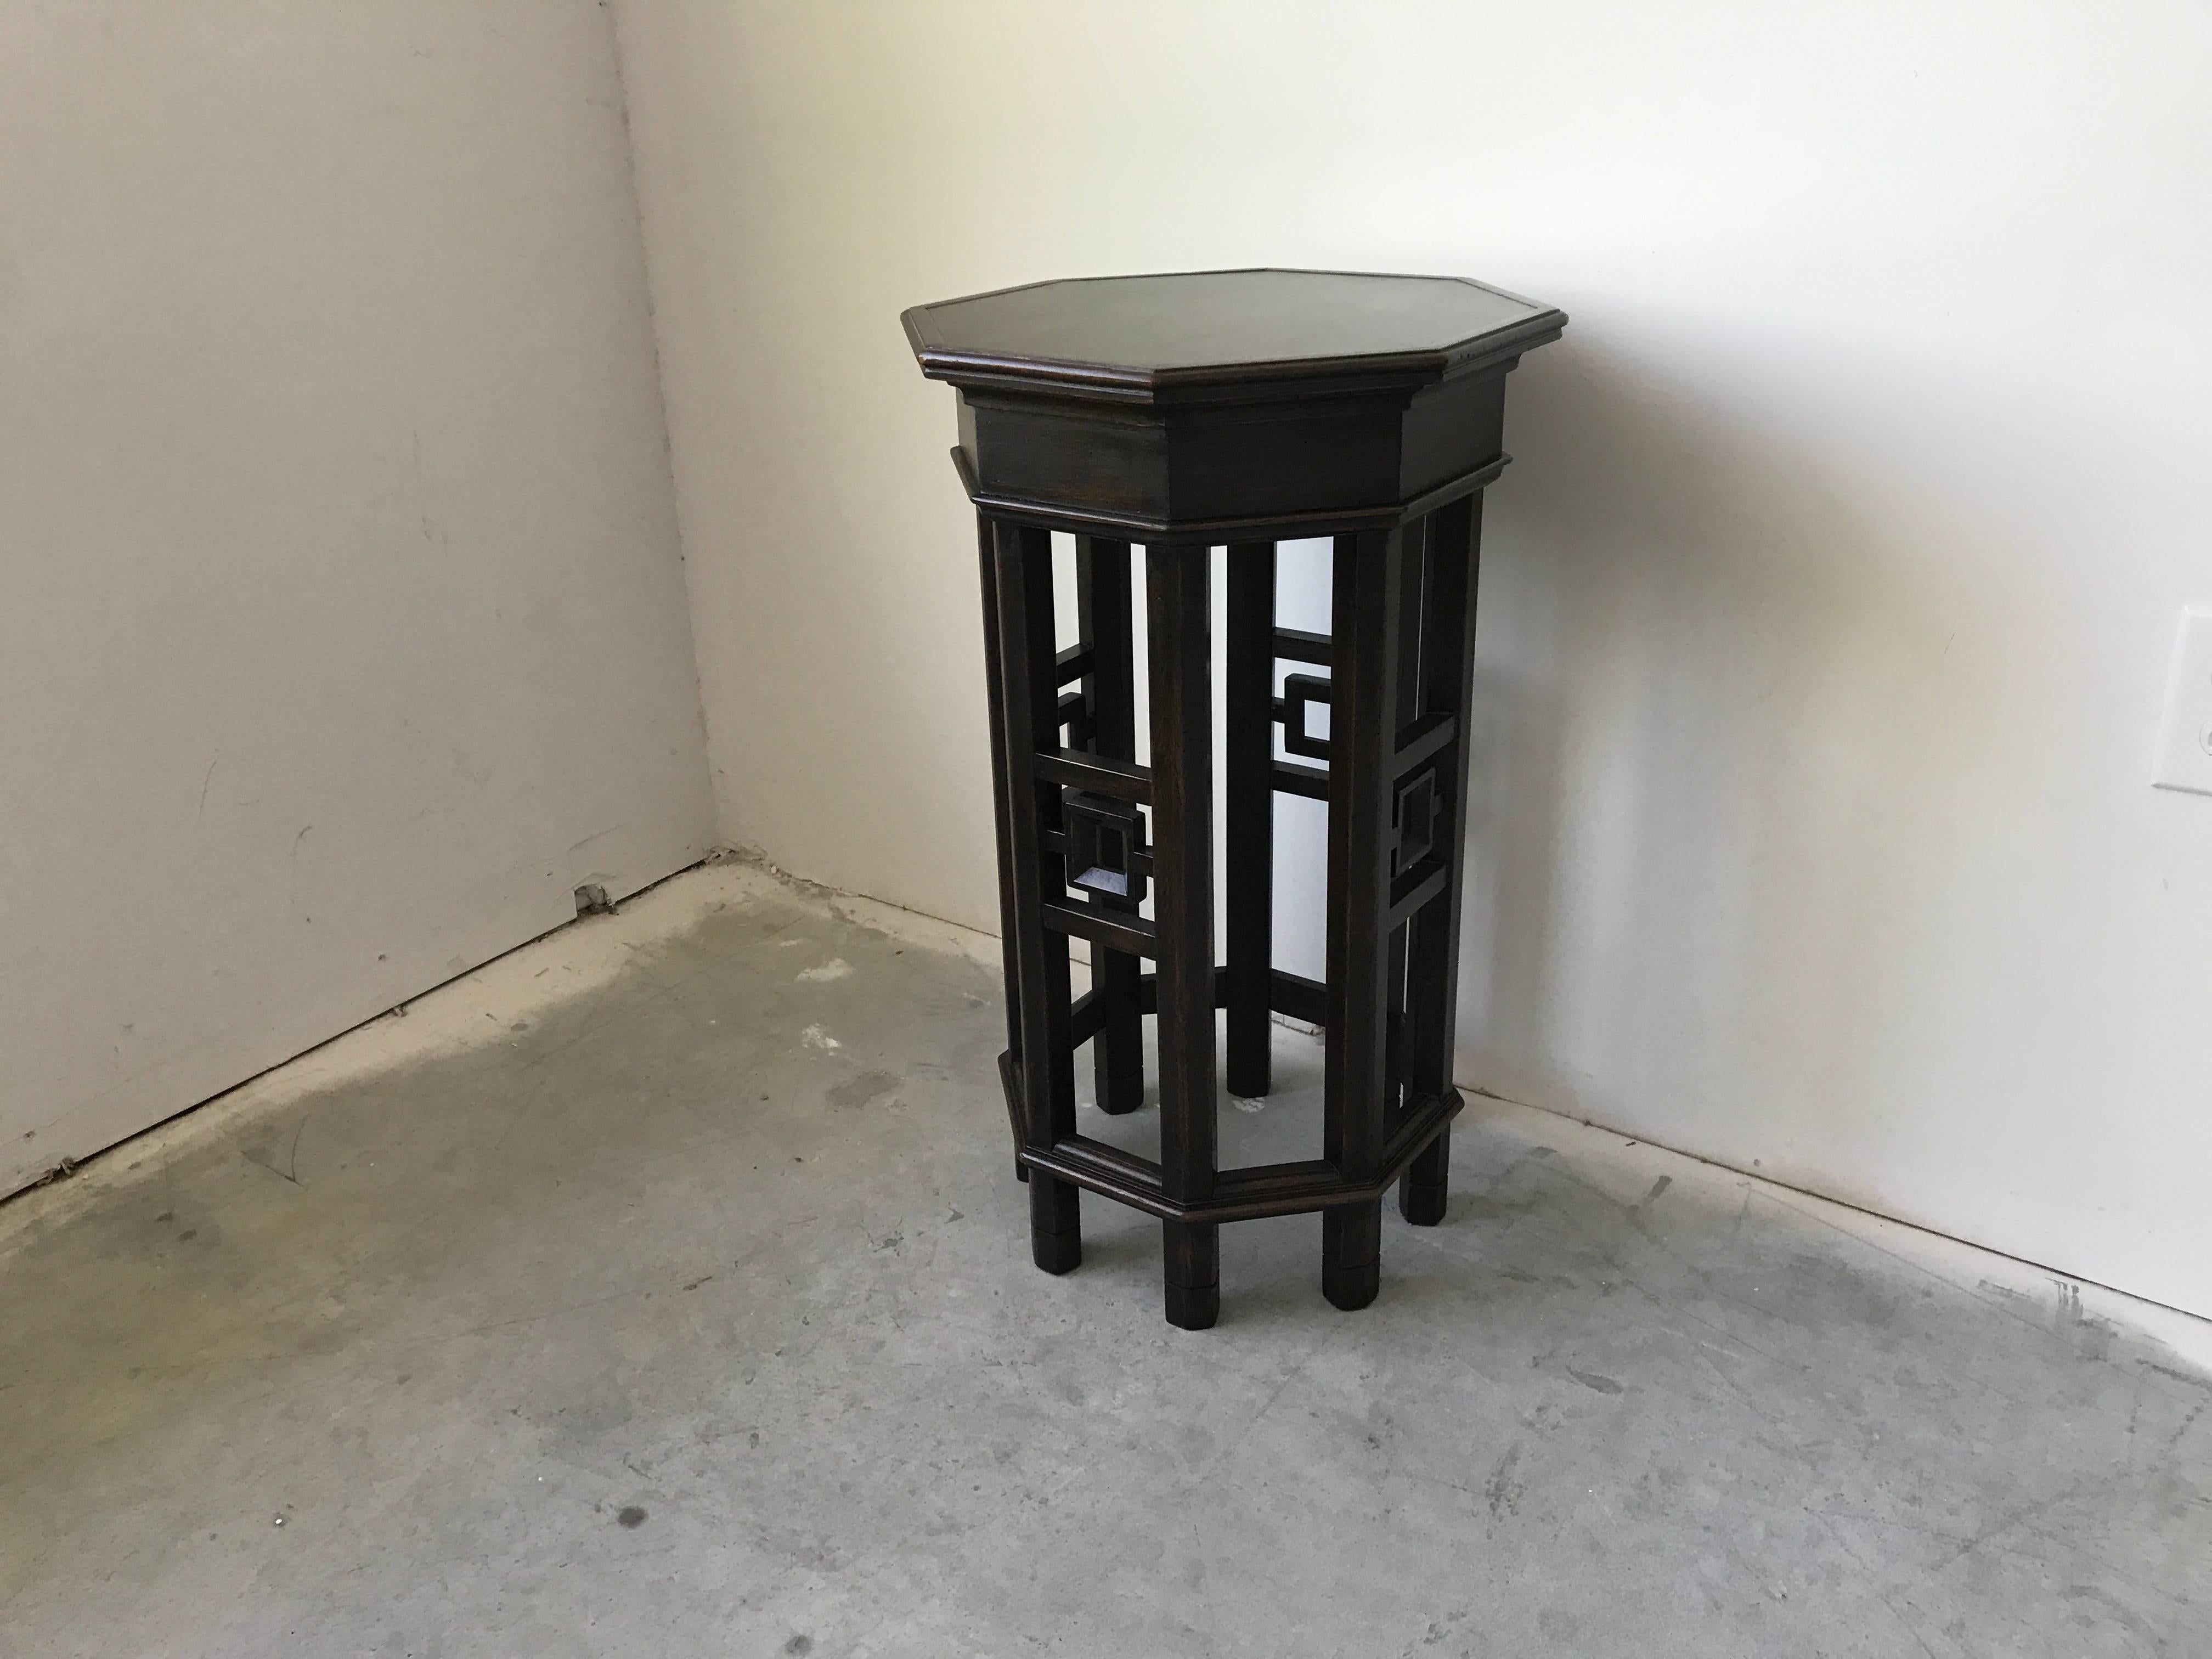 Offered is a beautiful, 1960s Asian fretwork octagon side table in a dark walnut or ebony color. Extremely sturdy. Perfect as a side table, pedestal, or plant stand.